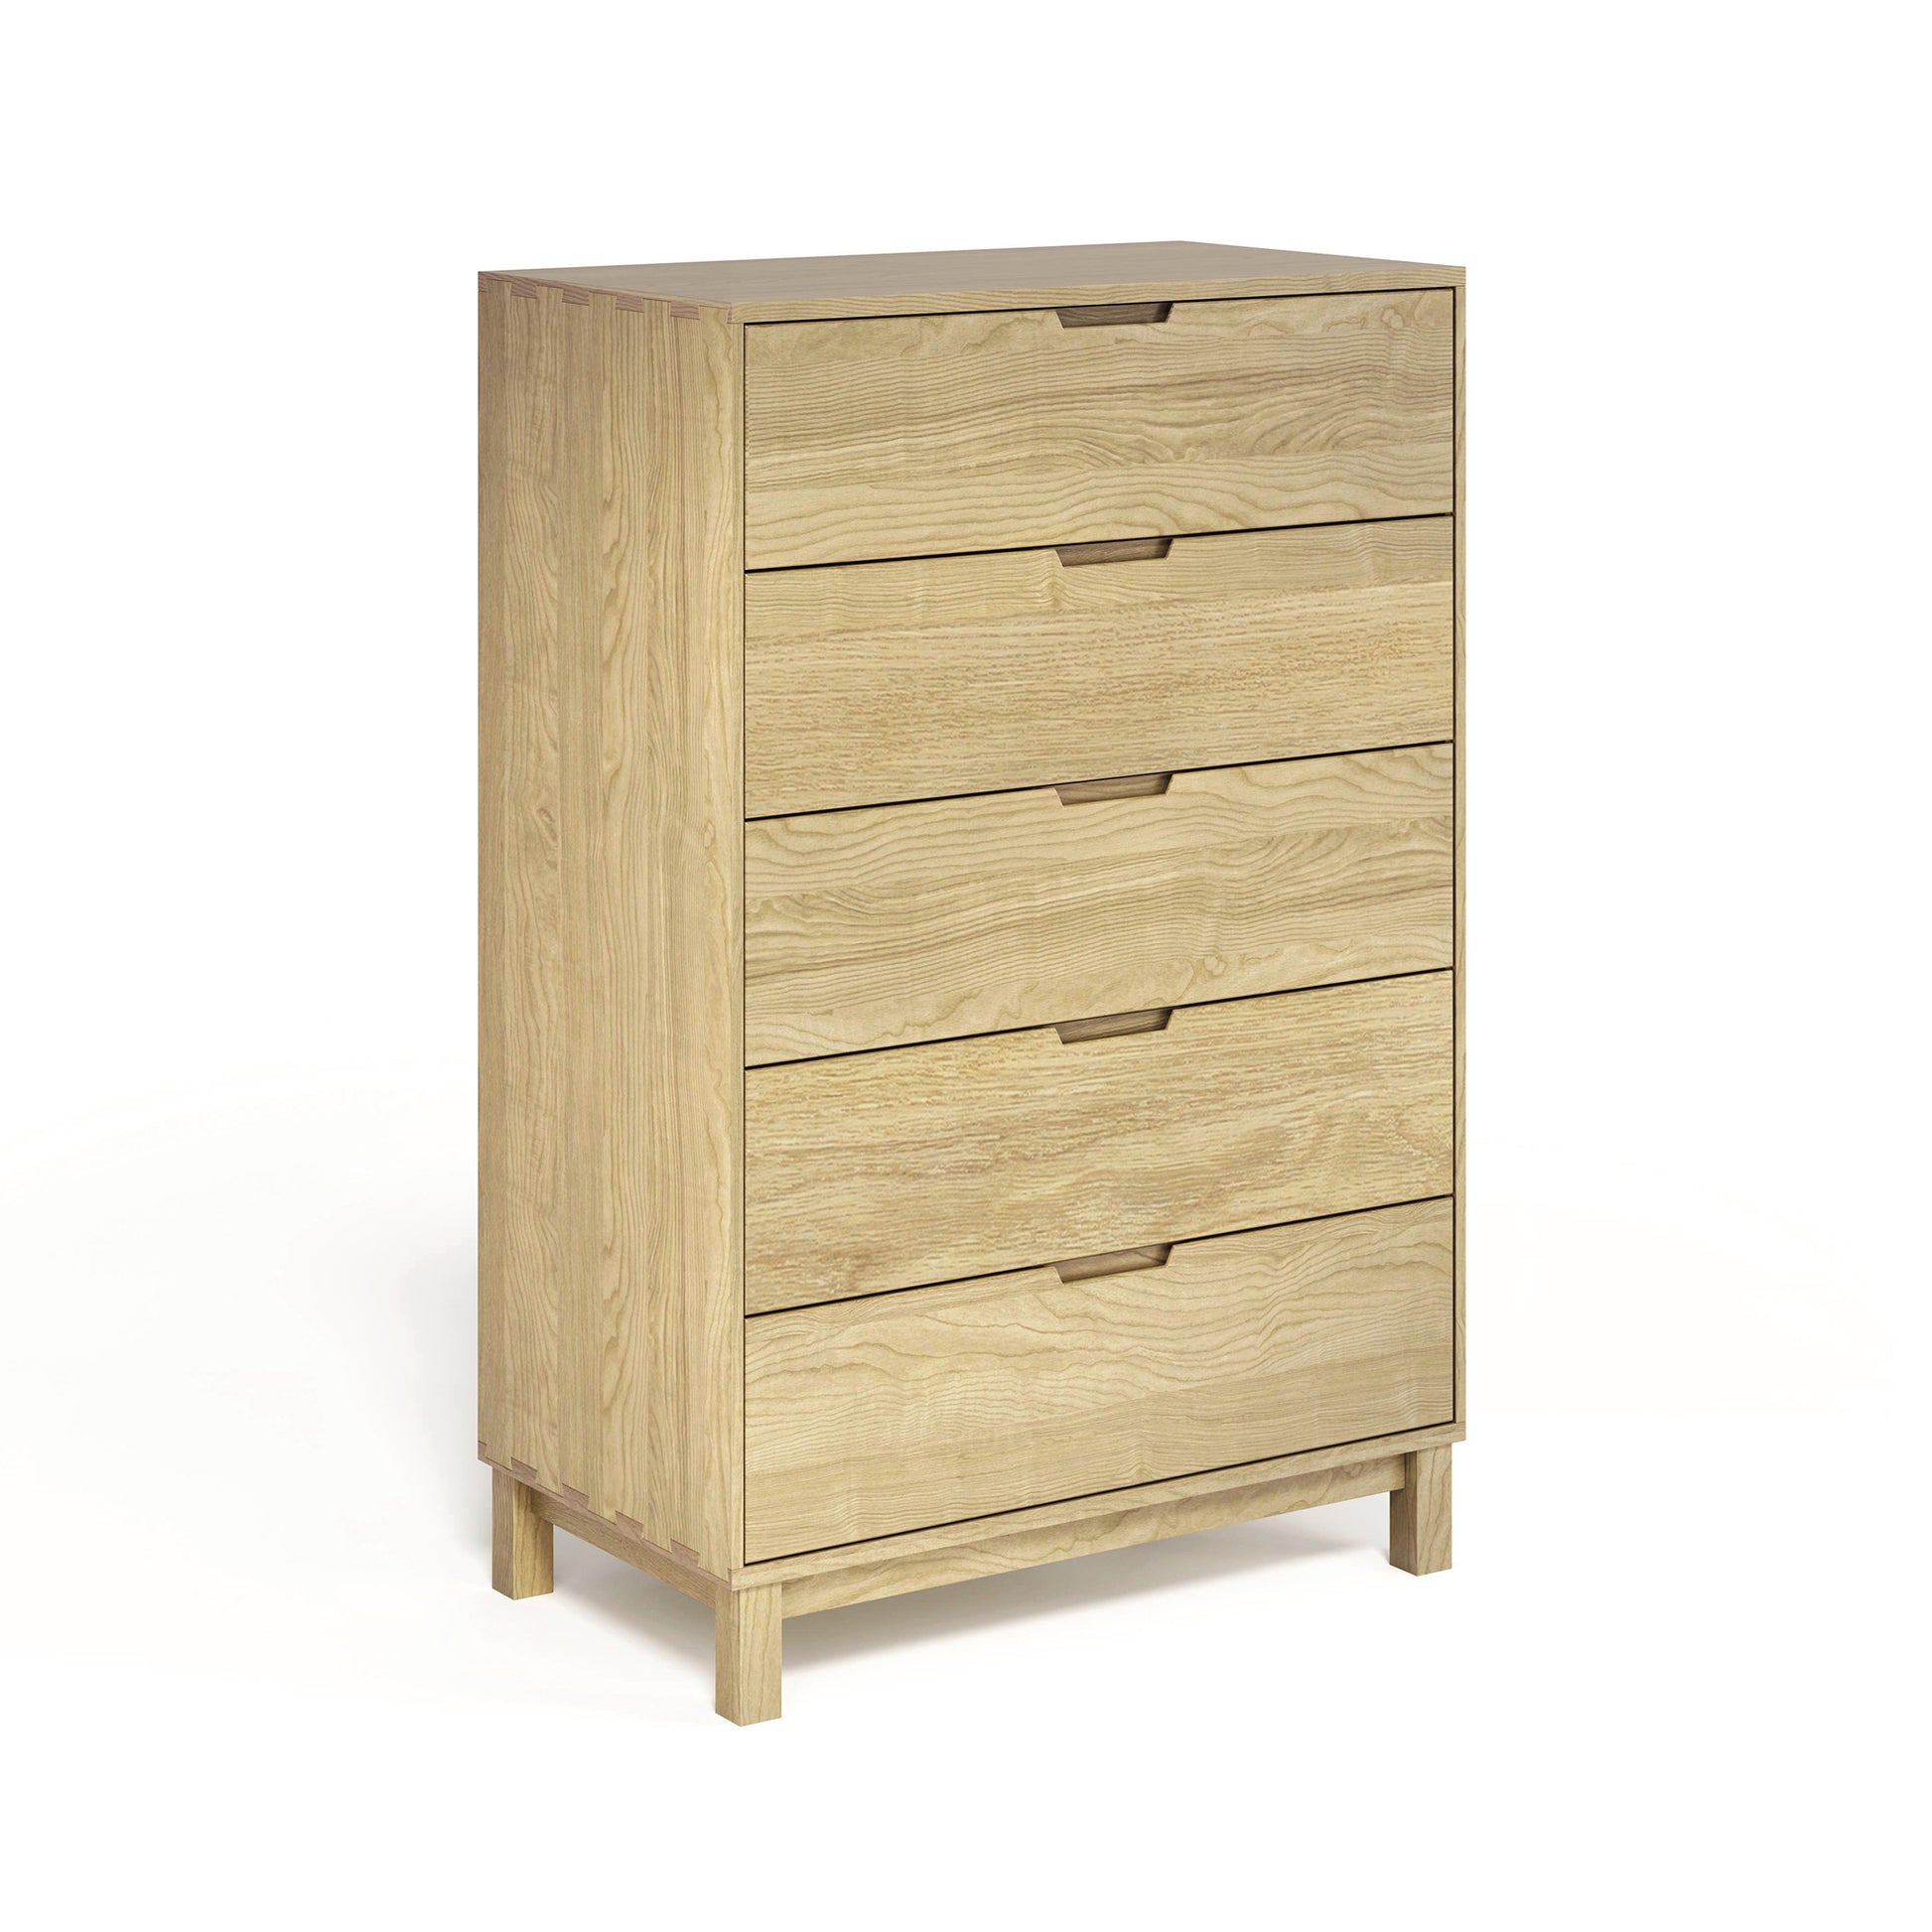 A Copeland Furniture Oslo 5-Drawer Wide Chest, against a white background.